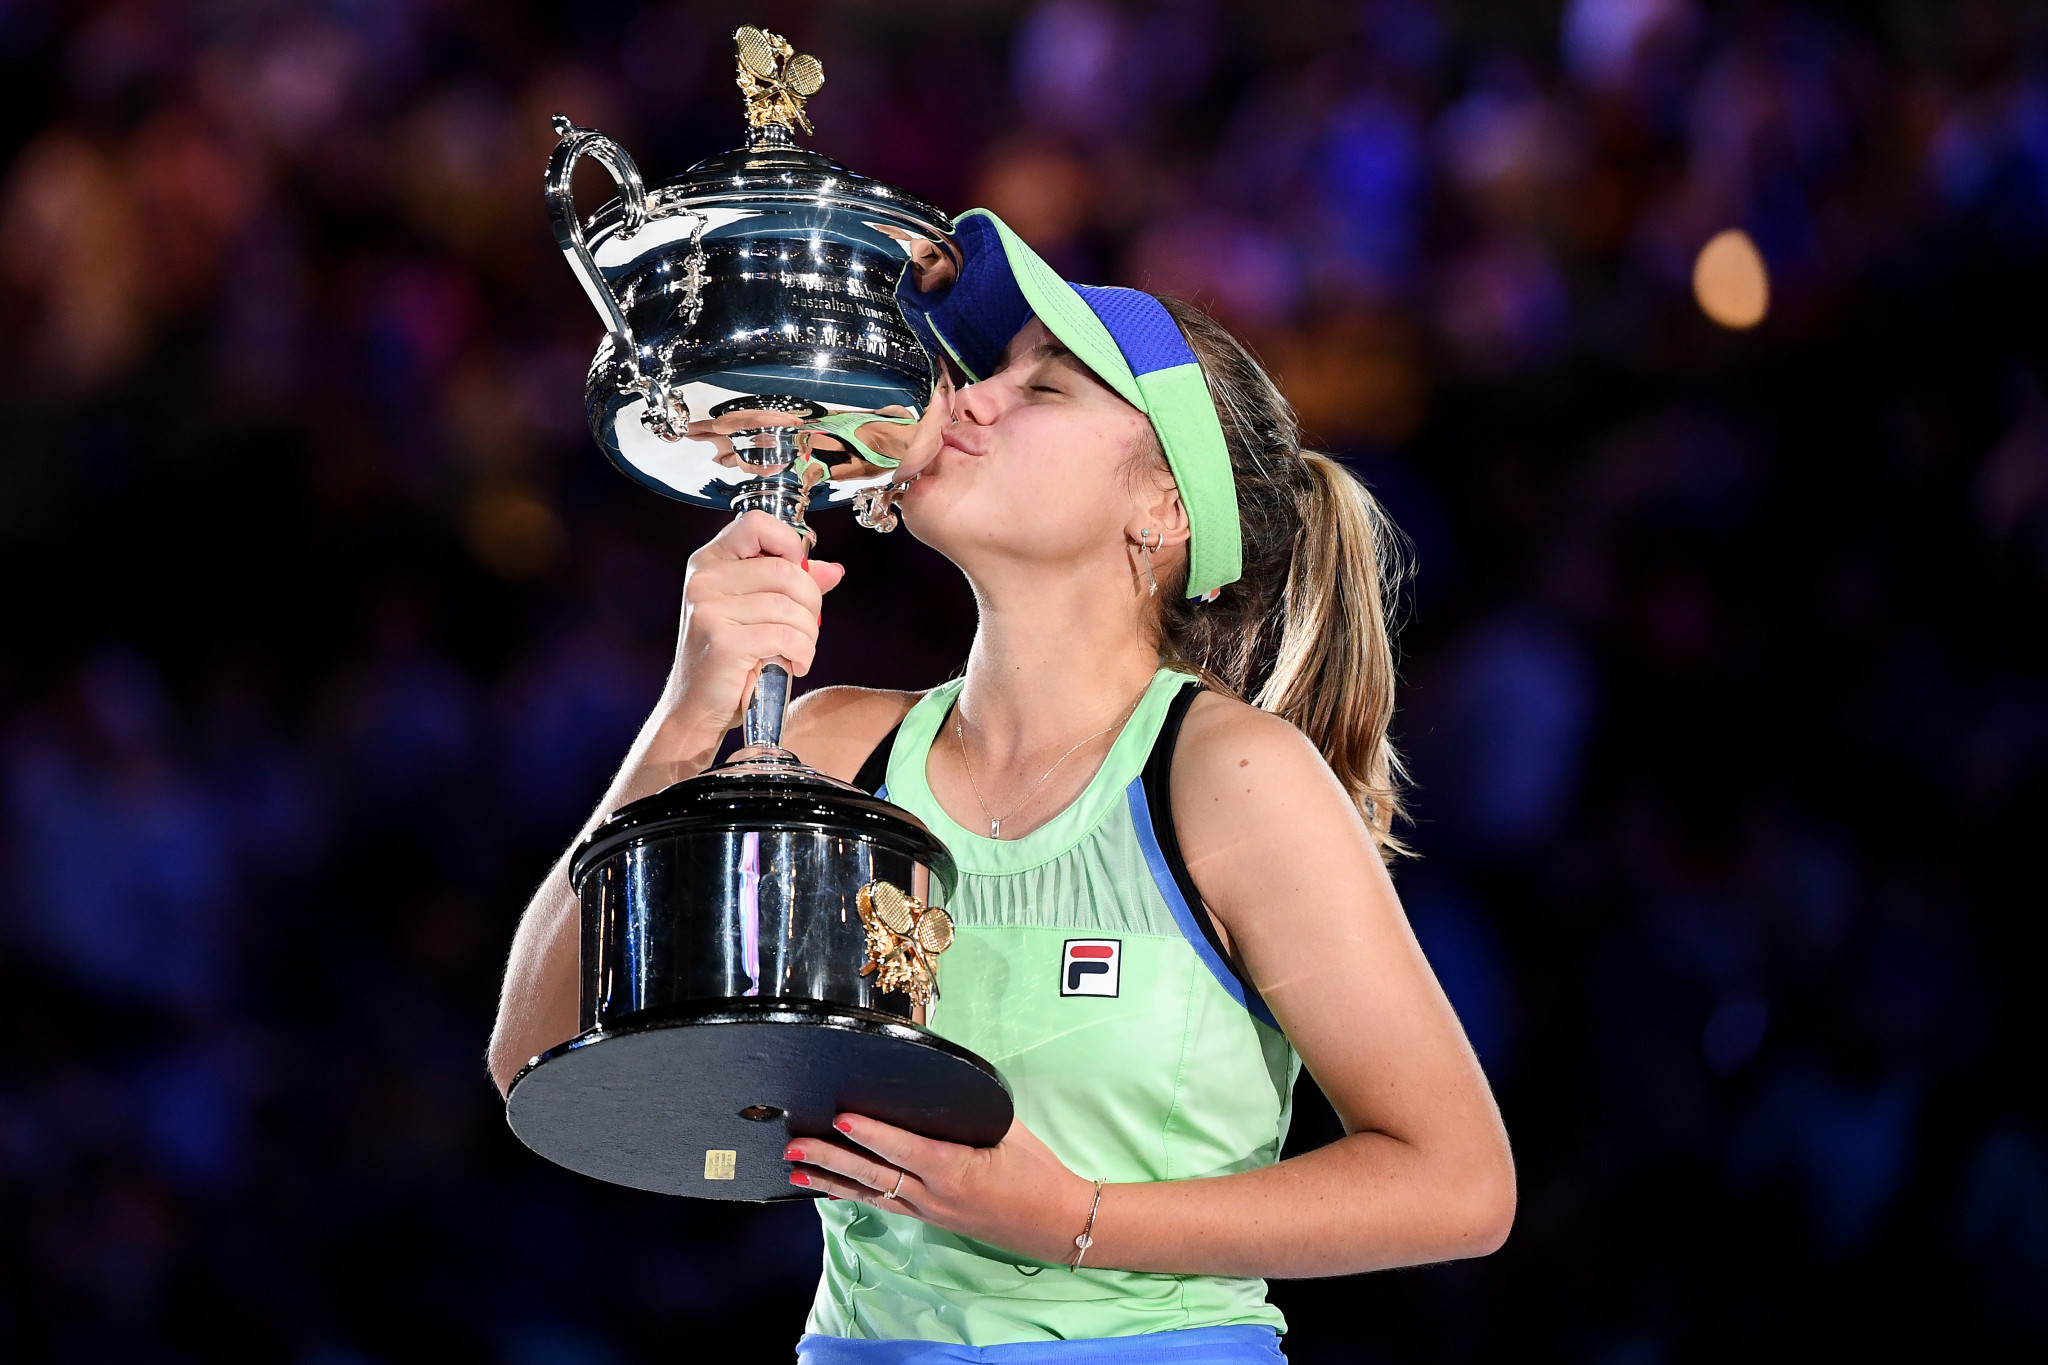 Osaka, Kenin and Świątek all nominated for WTA Player of the Year